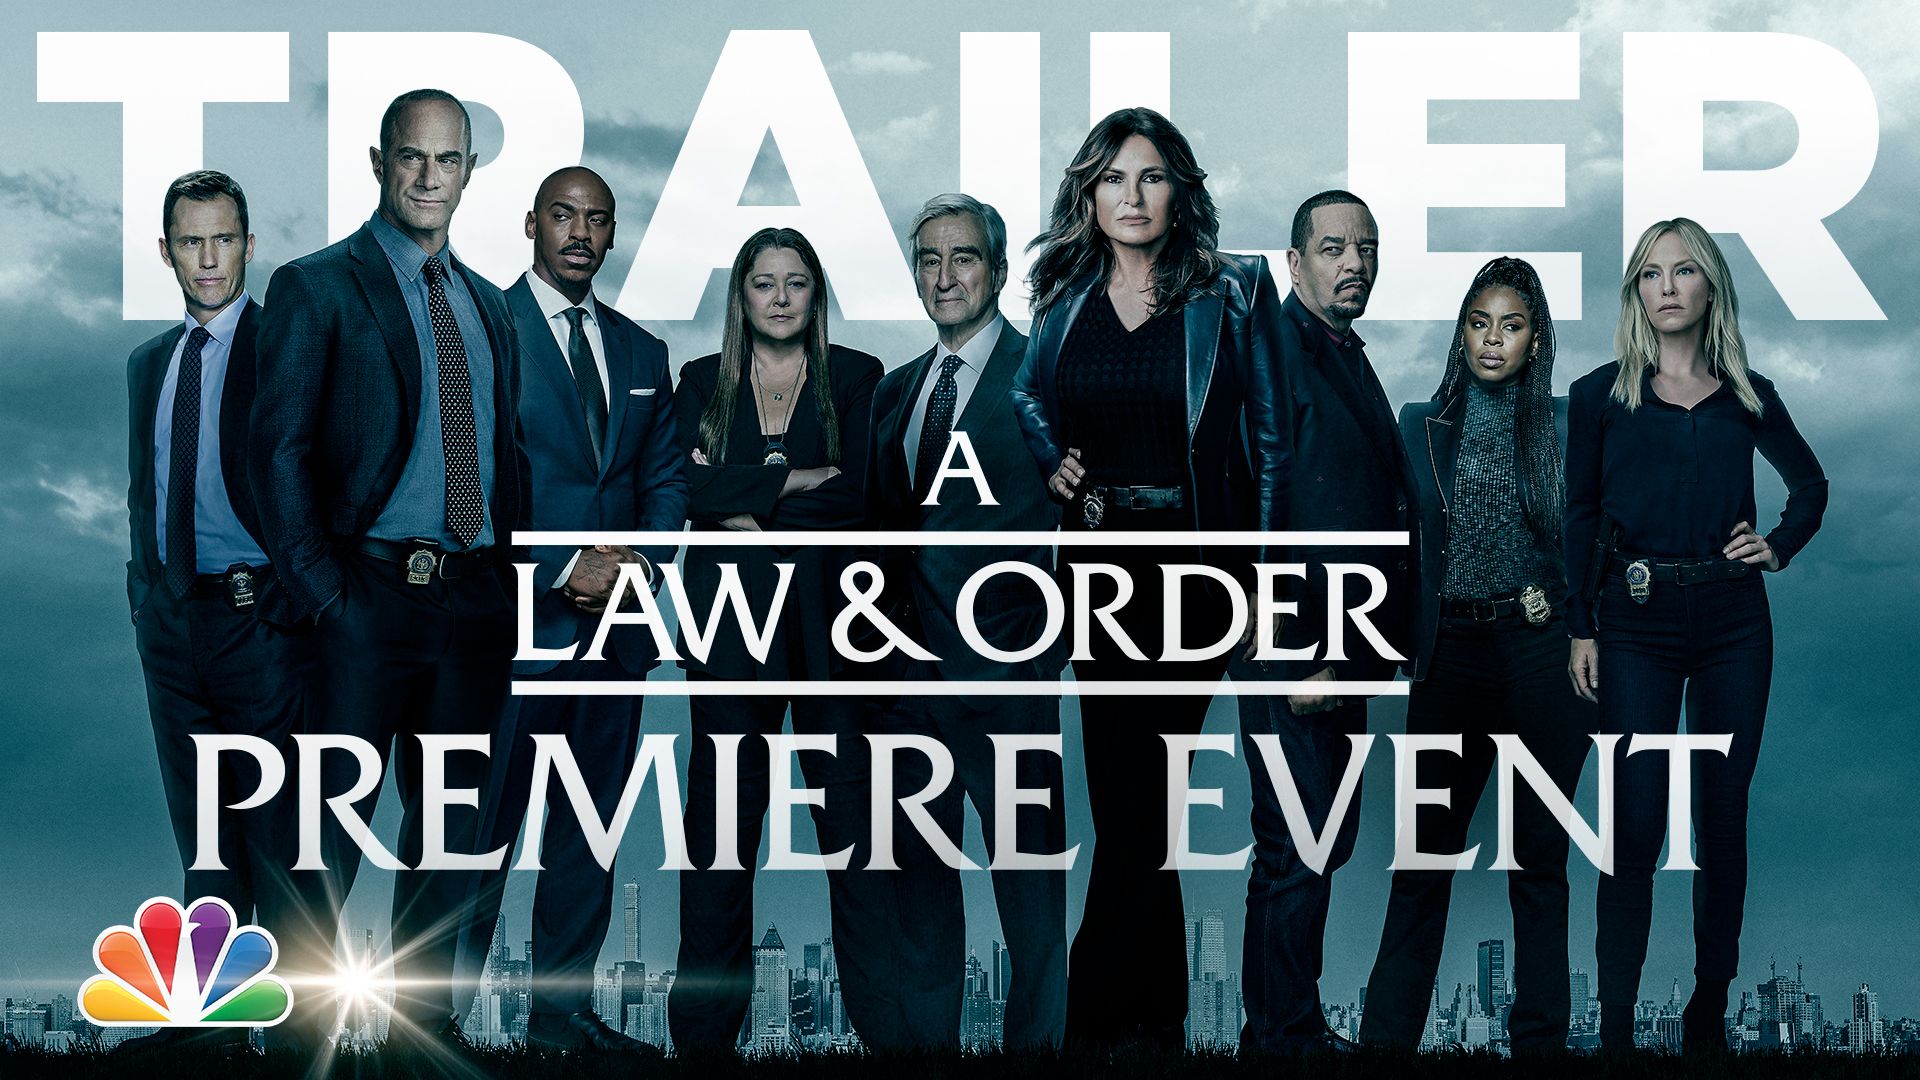 Law & Order 3 part event